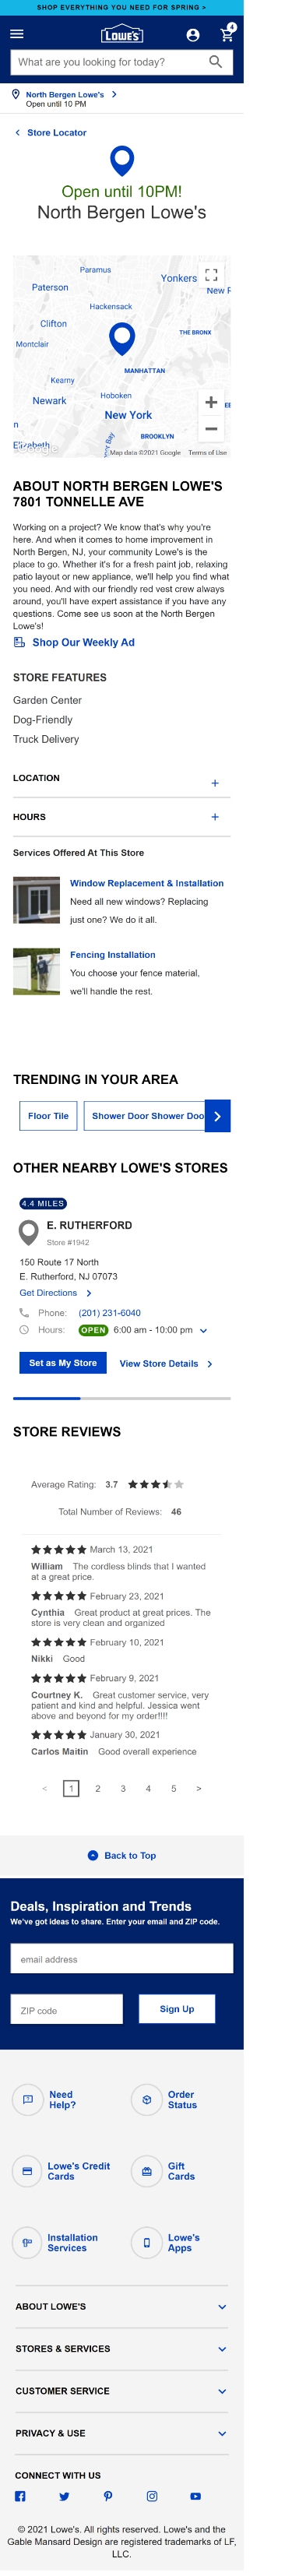 lowes store detail page mobile